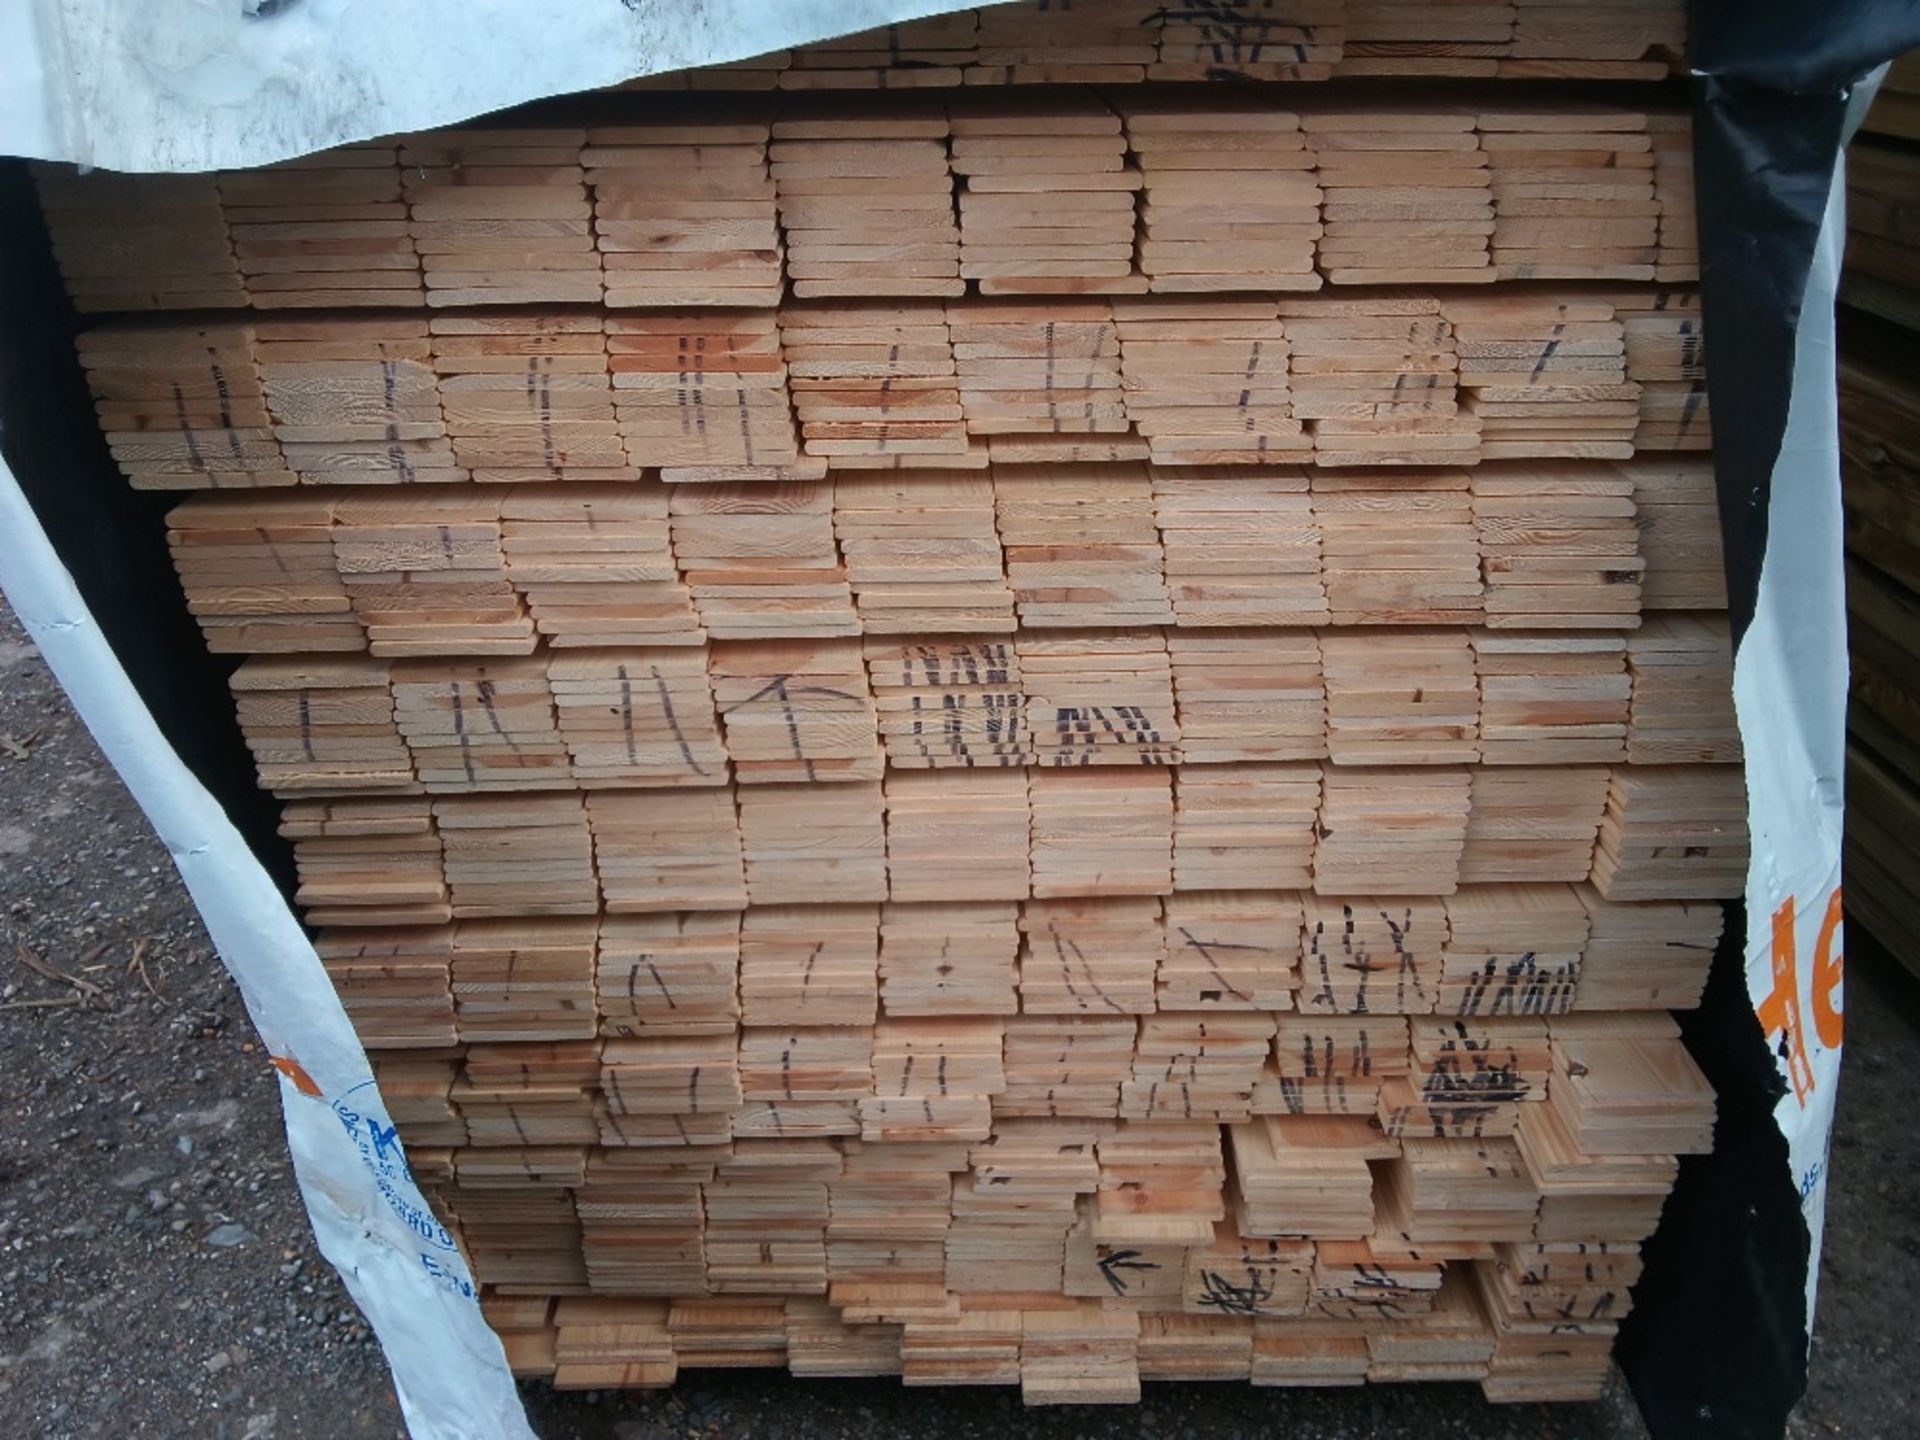 EXTRA LARGE PACK OF UNTREATED HIT AND MISS CLADDING TIMBER BOARDS: 1.75M LENGTH X 100MM WIDTH APPRO